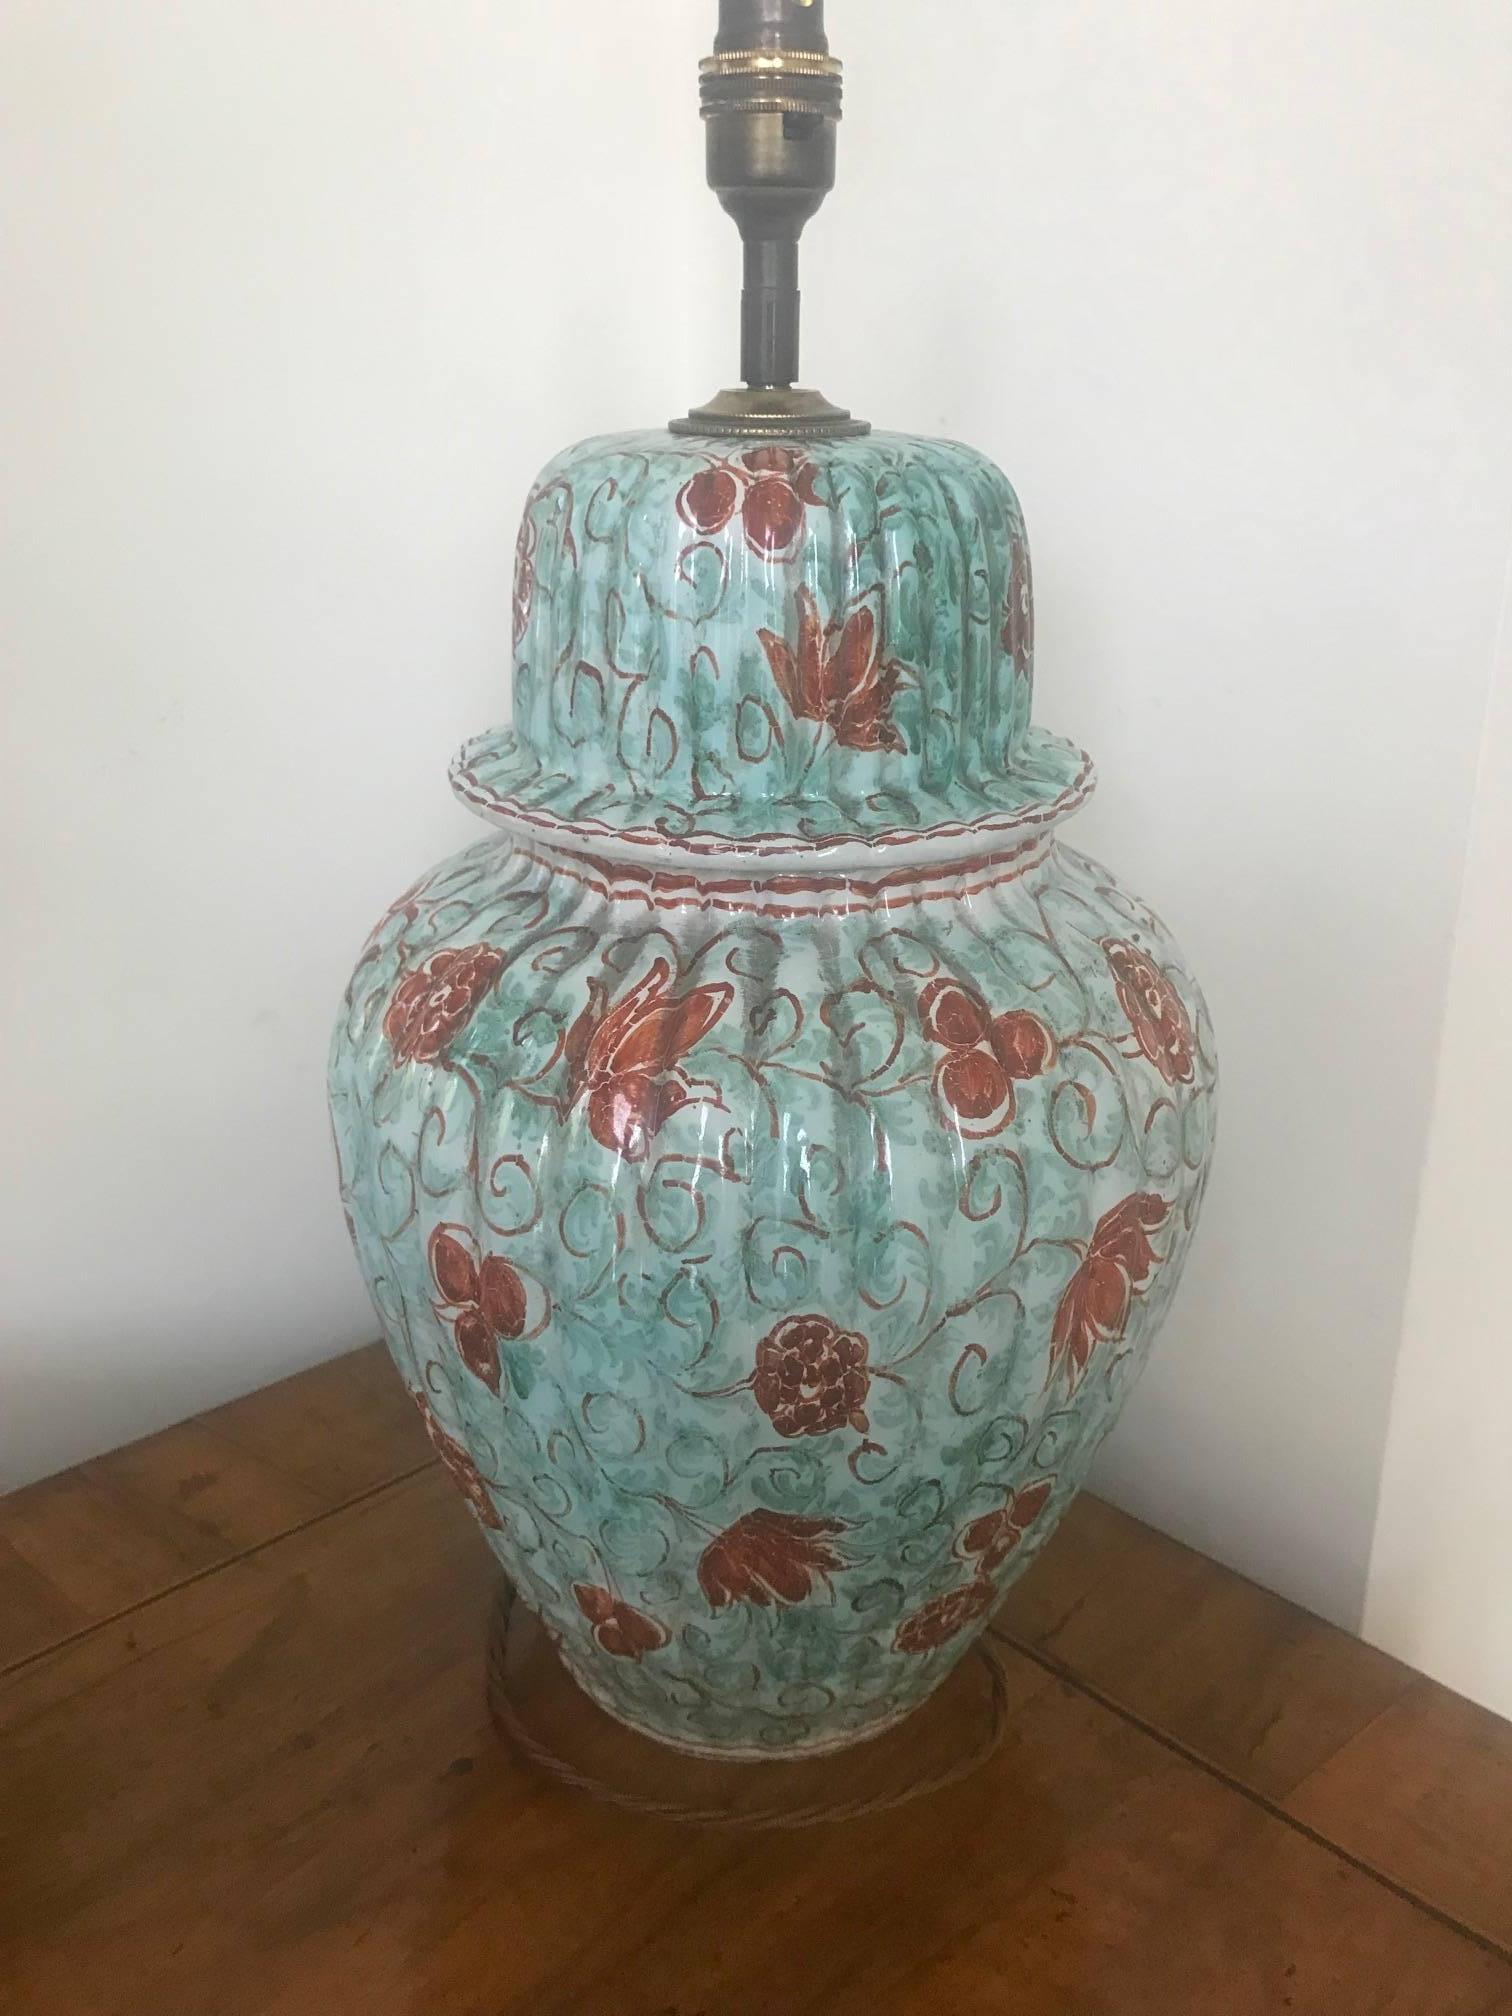 Green and burnt orange floral glazed ceramic lidded vase converted to a lamp, French, circa 1940s. Signed on the base PB